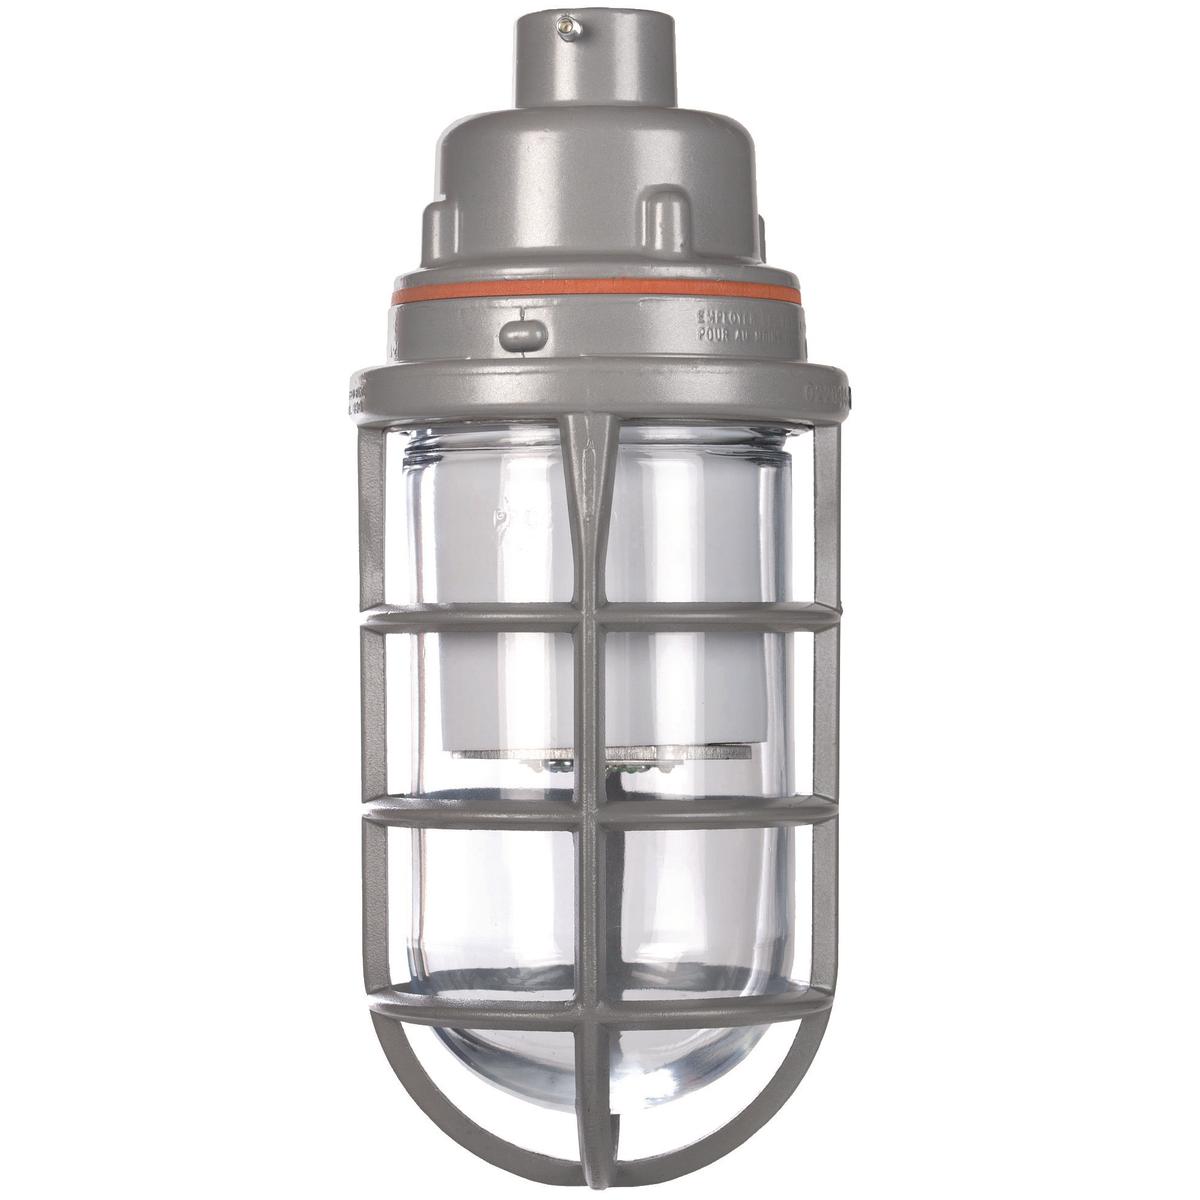 Hubbell VSL1330A2HG The VSL Series is a Vapor Tight/ Utility fixture using energy efficient LED's. This fixture is made with a cast copper-free aluminum housing and mount that is  suitable for harsh and hazardous environments. With the design of this fixtures internal heat s